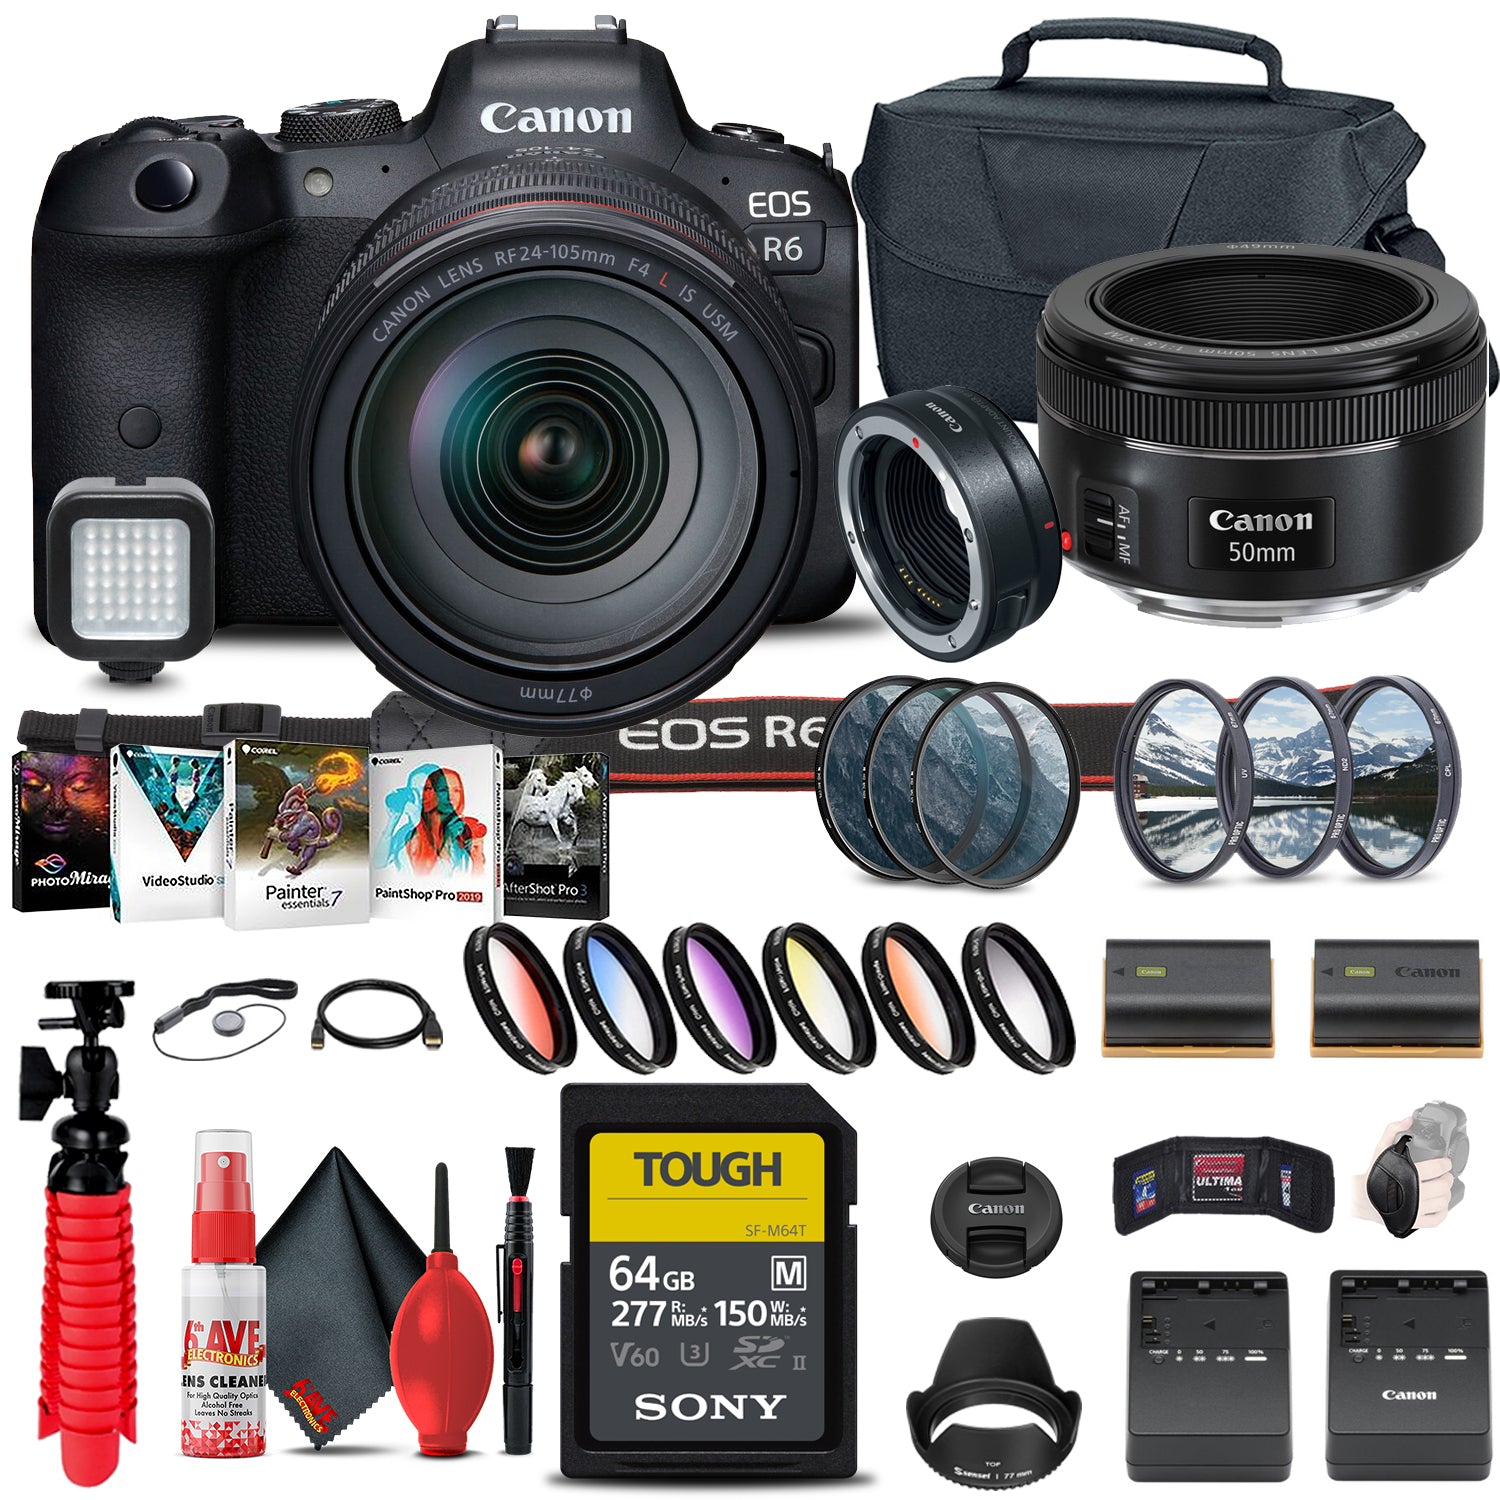 Canon EOS R6 with 24-105mm f/4L Lens On-the-go Bundle